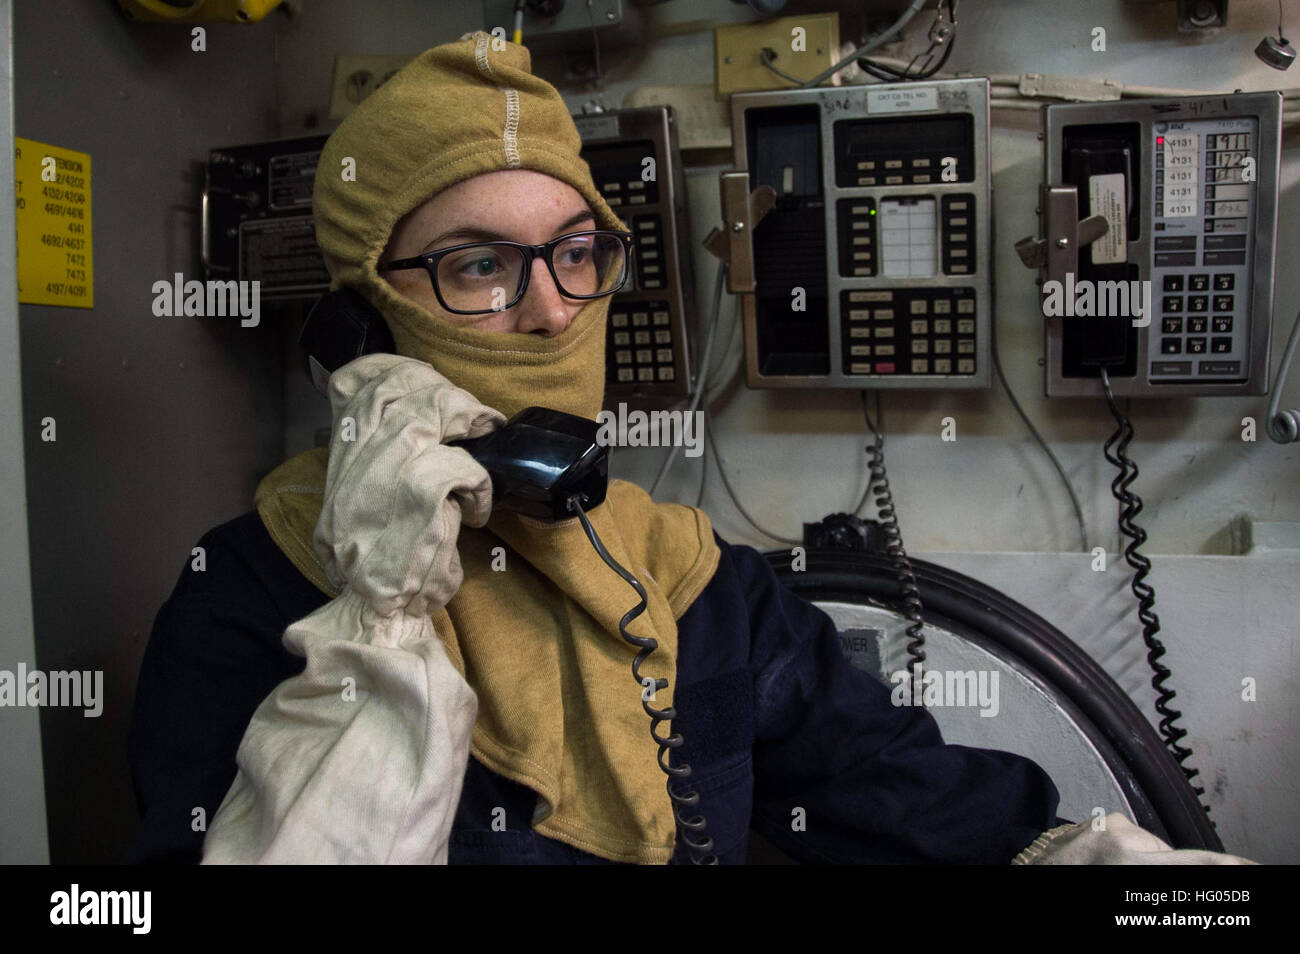 161205-N-AY934-021  SASEBO, Japan (Dec. 5, 2016) Petty Officer 3rd Class Rosemary Carter establishes communications from Repair Locker 7 to Damage Control Central during a general quarters drill aboard amphibious assault ship USS Bonhomme Richard (LHD 6). Bonhomme Richard, forward-deployed to Sasebo, Japan, is serving forward to provide a rapid-response capability in the event of a regional contingency or natural disaster. (U.S. Navy photo by Petty Officer 2nd Class Naomi VanDuser/Released) USS Bonhomme Richard (LHD 6) General Quarters Drill 161205-N-AY934-021 Stock Photo